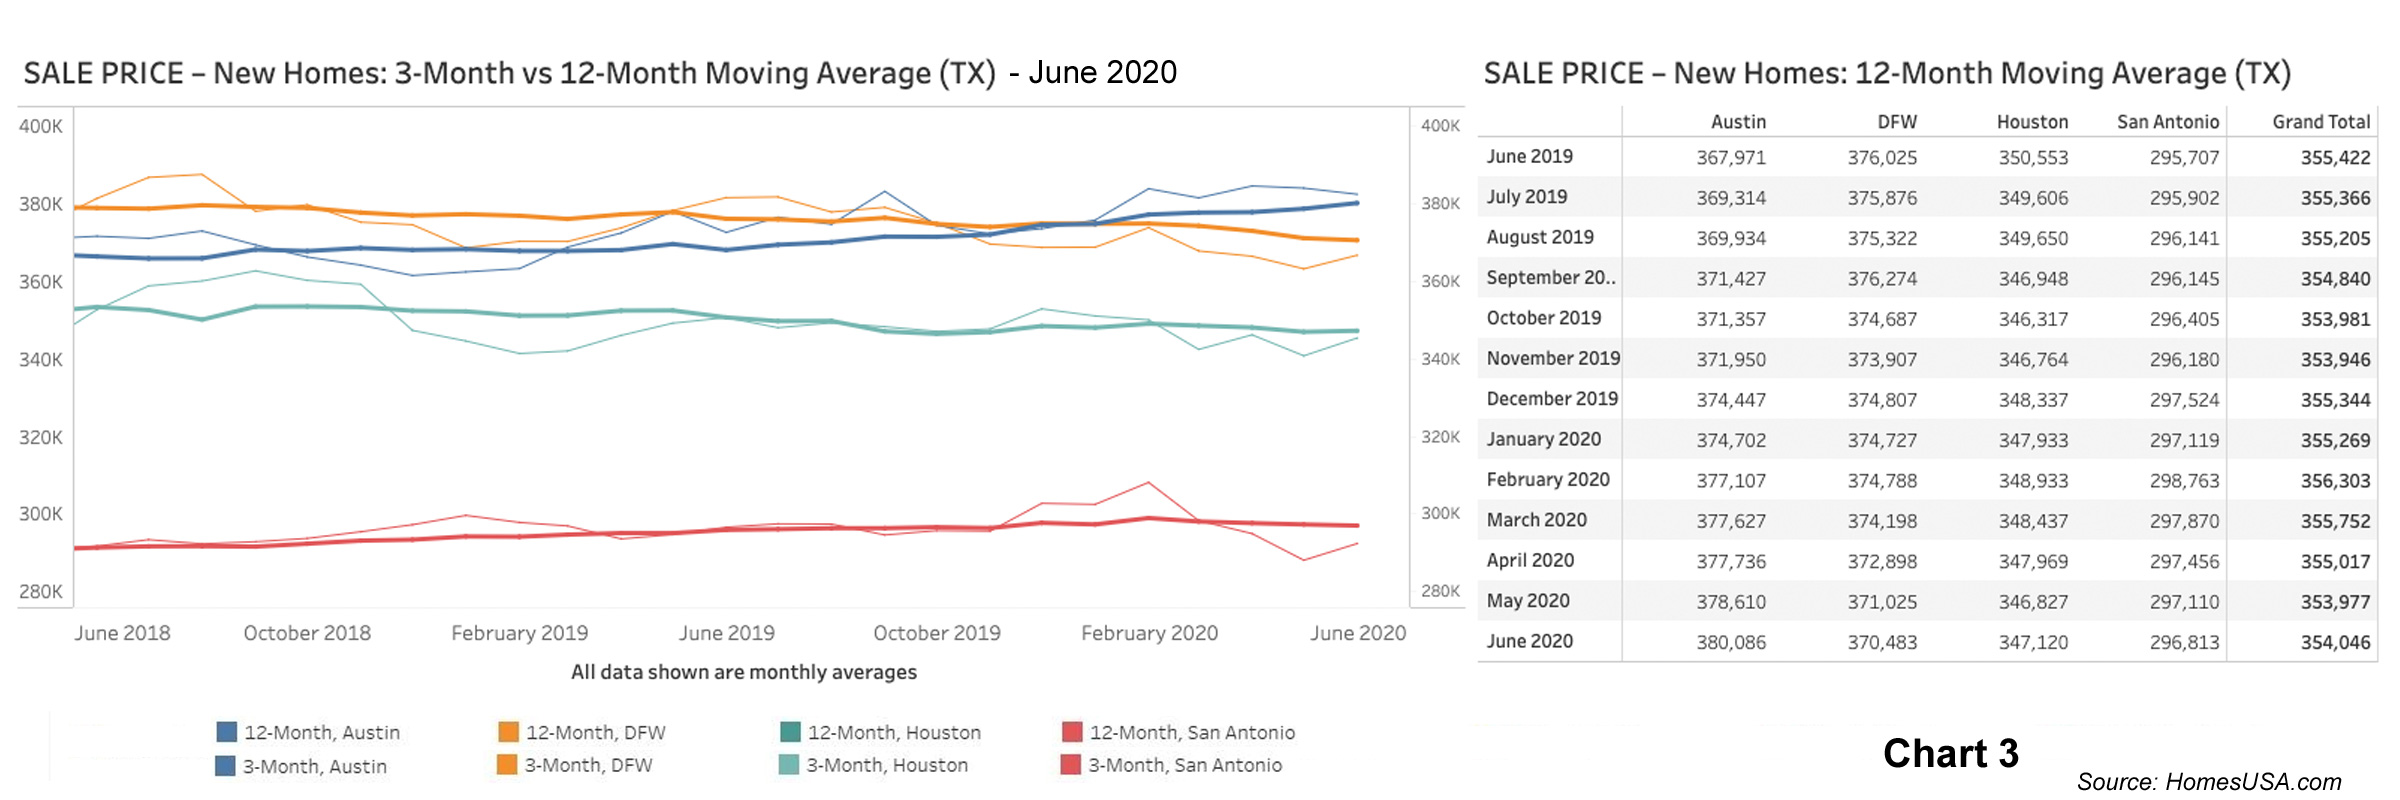 Chart 3: Texas New Home Sales Prices – June 2020